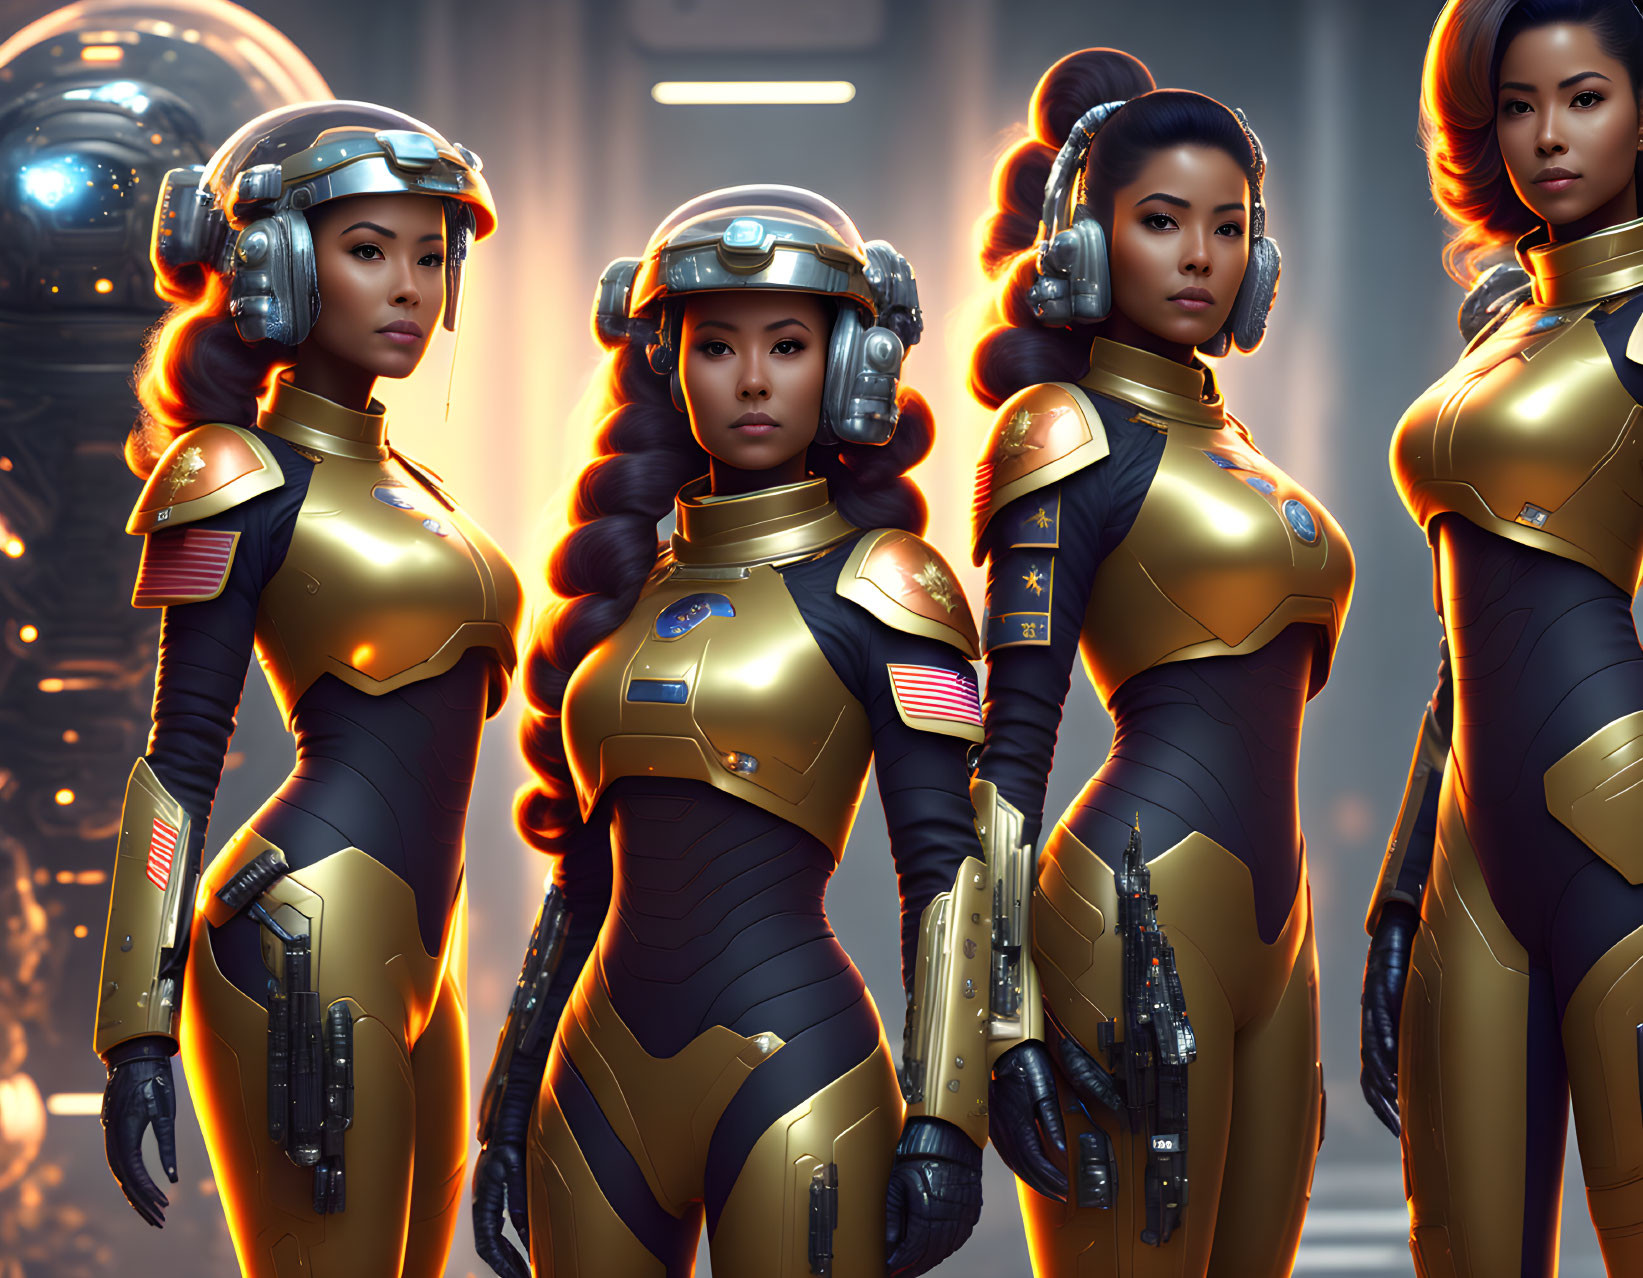 Three futuristic female warriors in gold and black armor suits in a sci-fi setting.